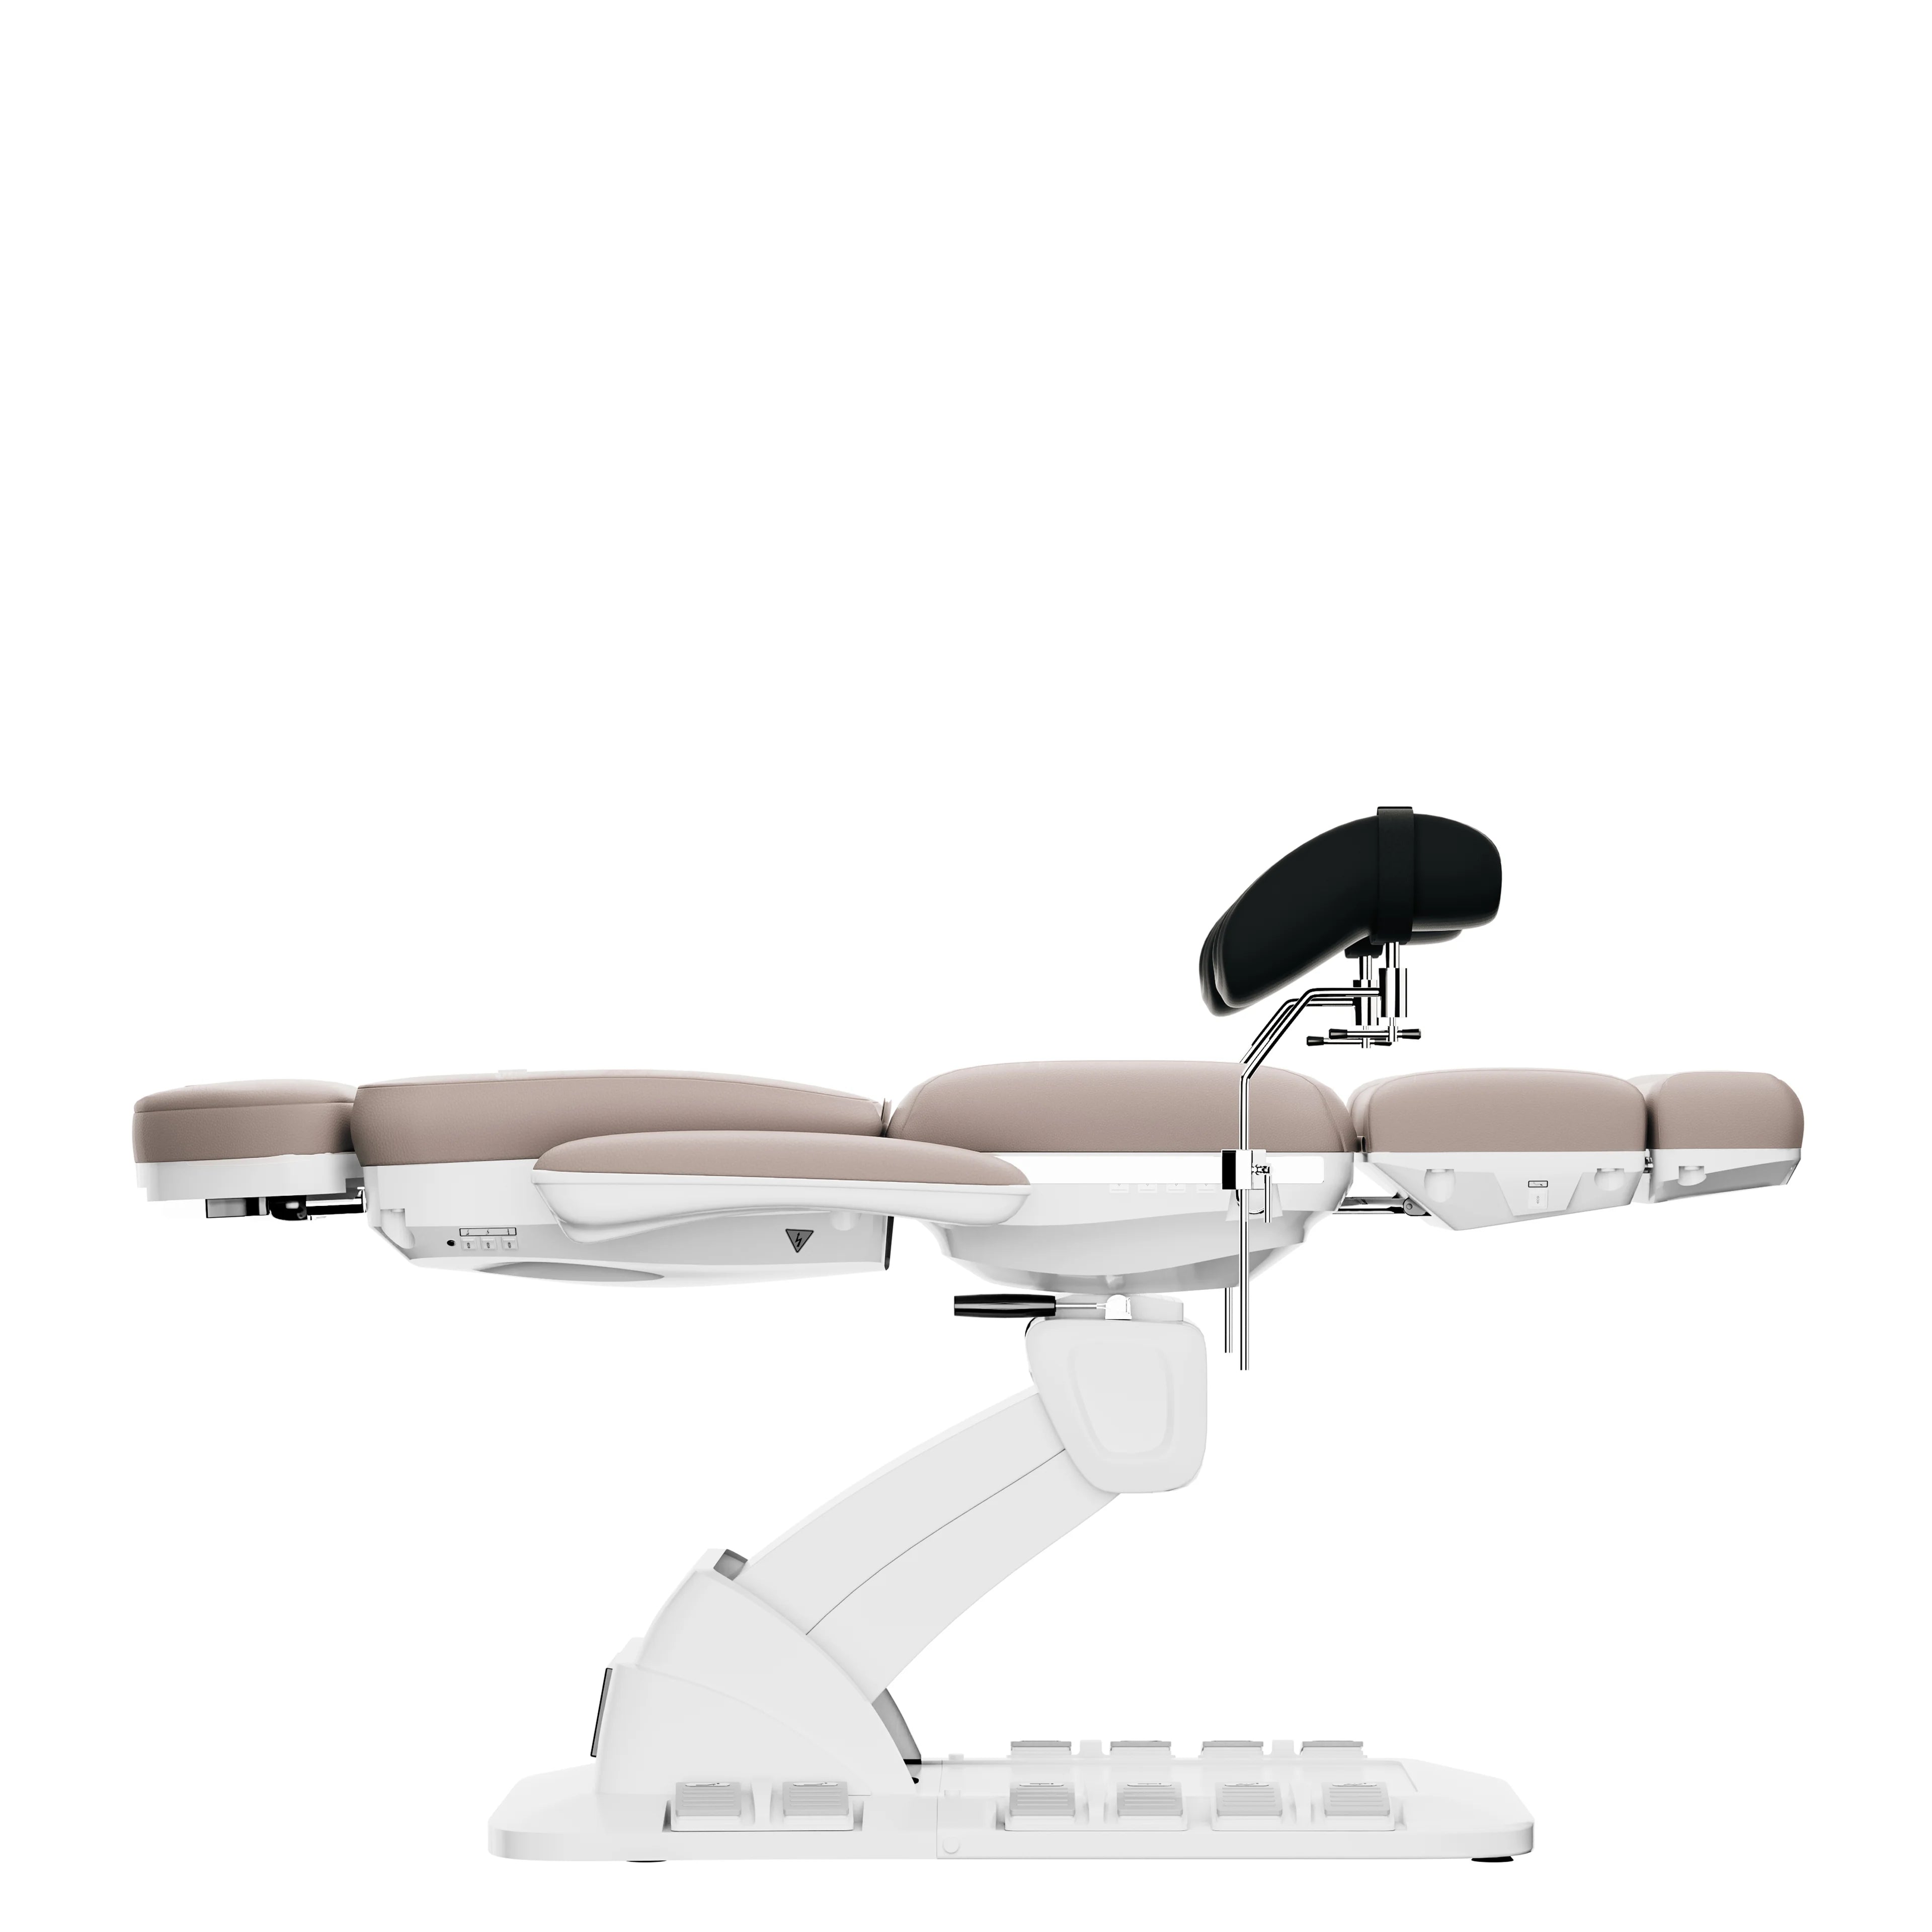 SPAMARC . Novato (Taupe) . OBGYN & GYNECOLOGY . STIRRUPS . ROTATING . 4 MOTOR SPA TREATMENT CHAIR/BED